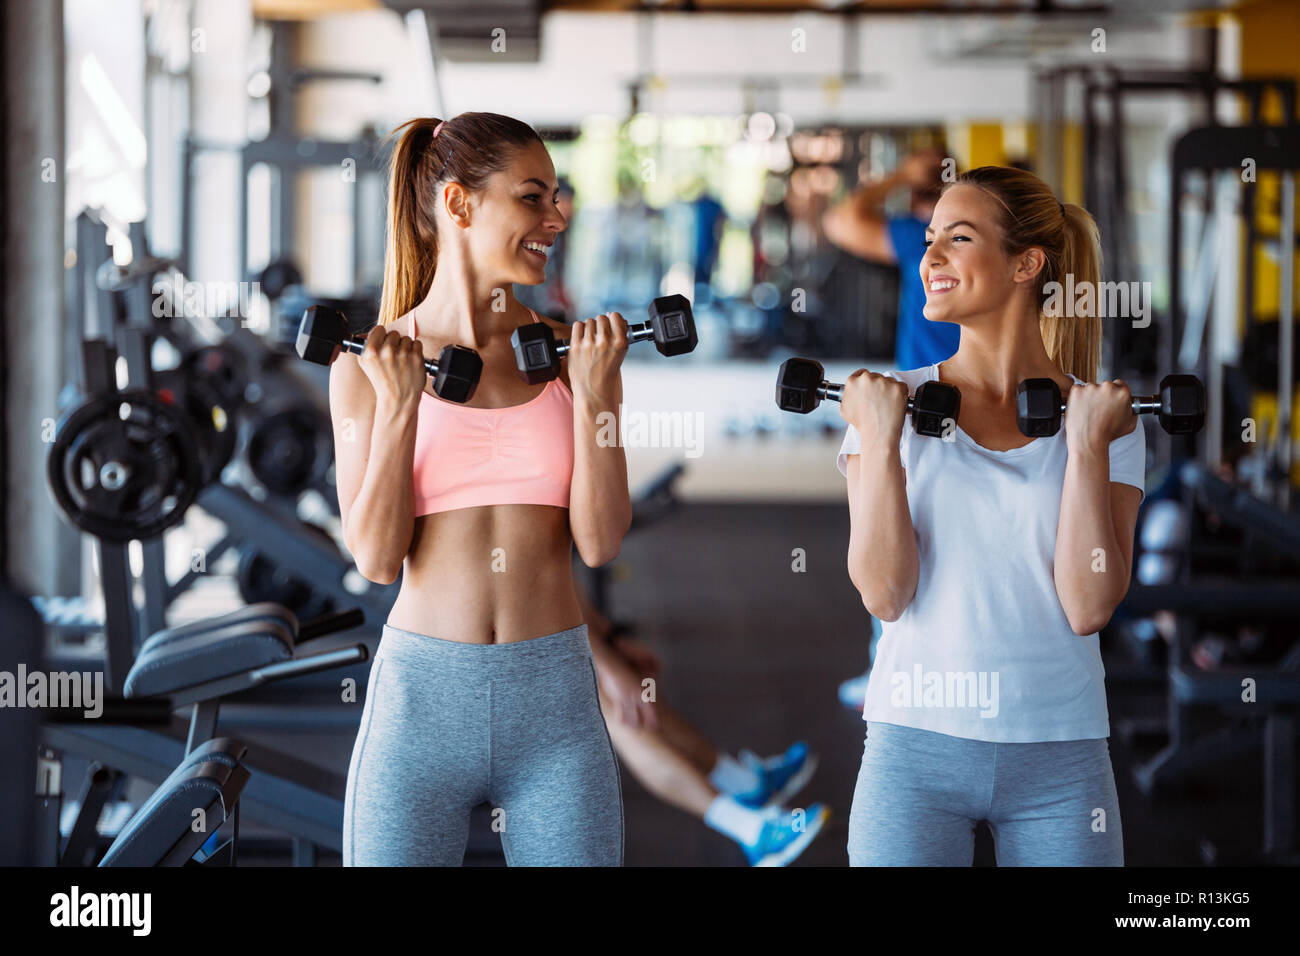 Woman working out Stock Photos, Royalty Free Woman working out Images